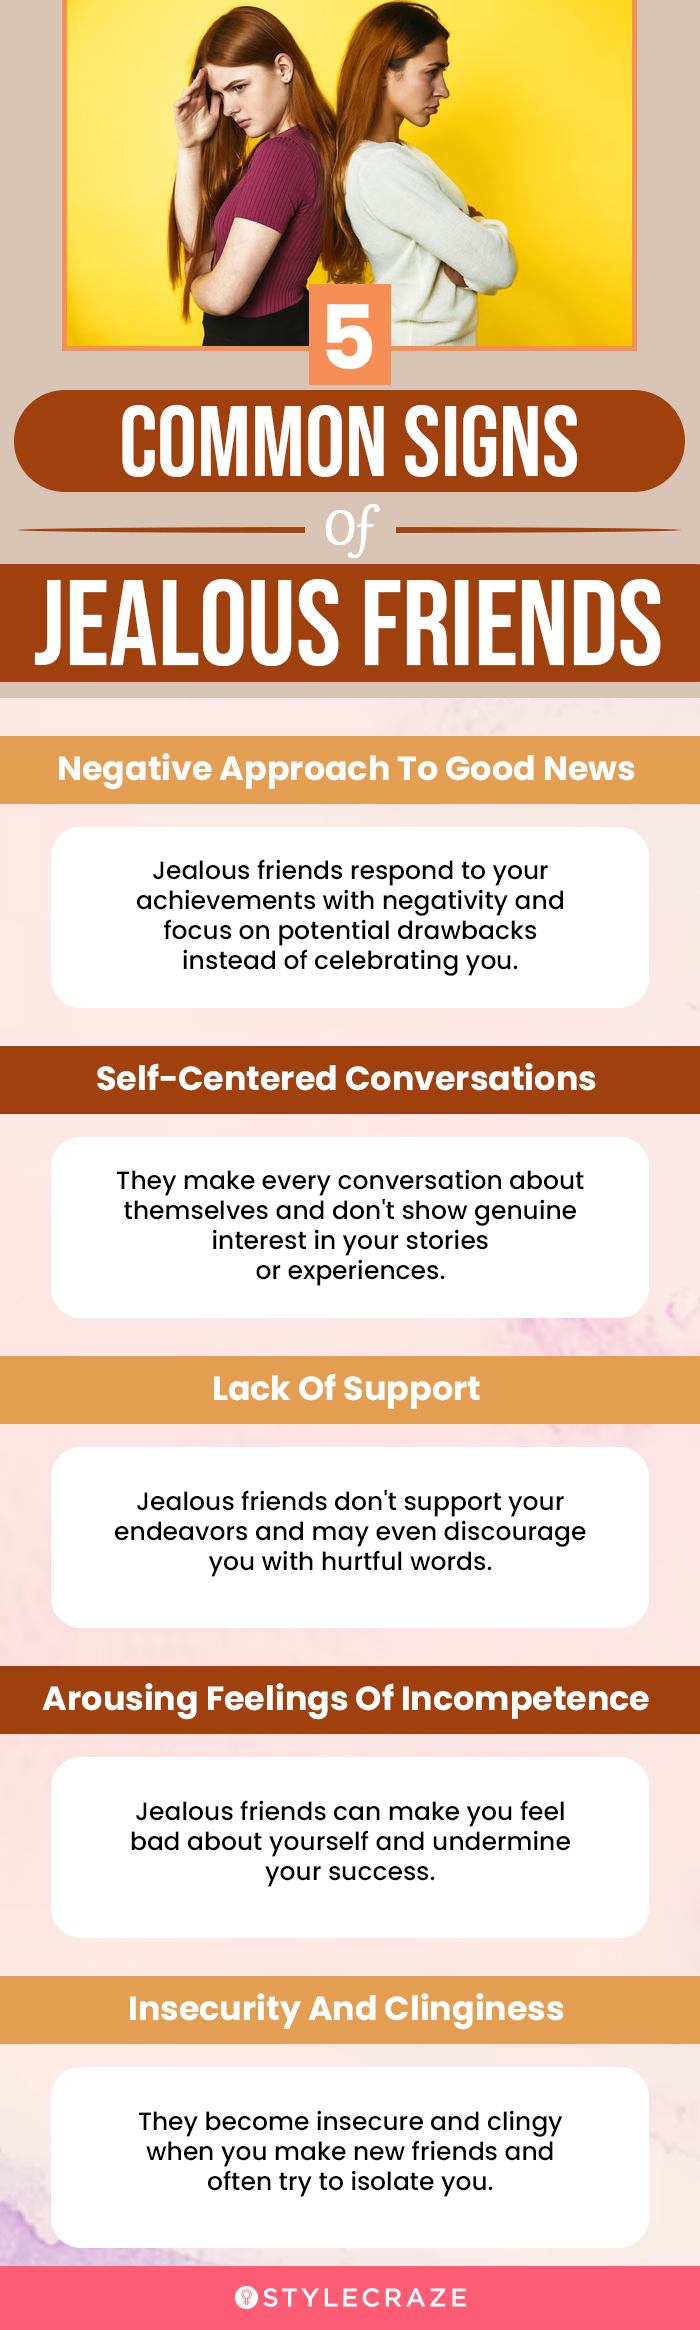 5 common signs of jealous friends(infographic)